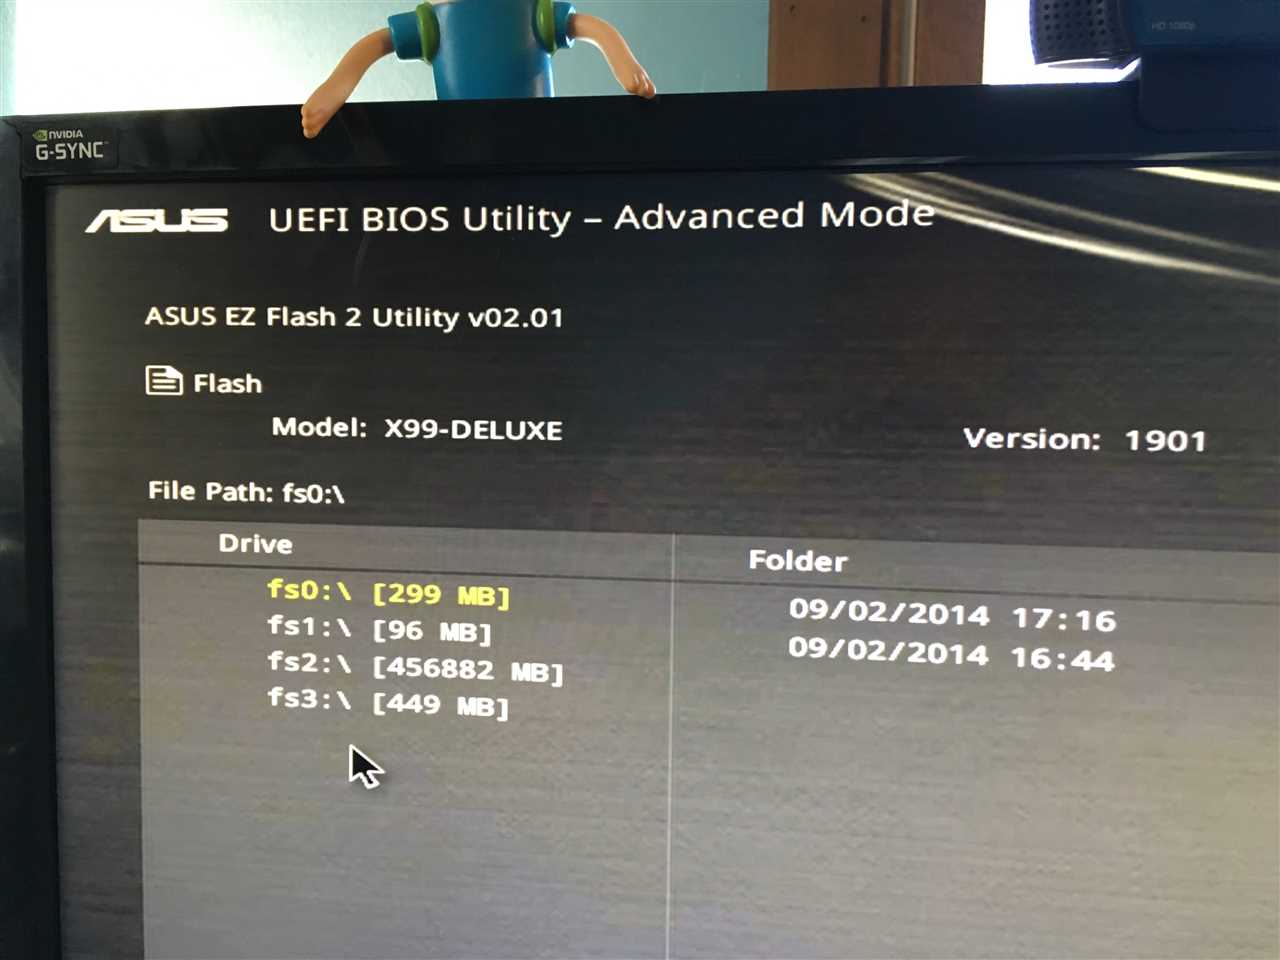 Challenges of Updating BIOS Without USB